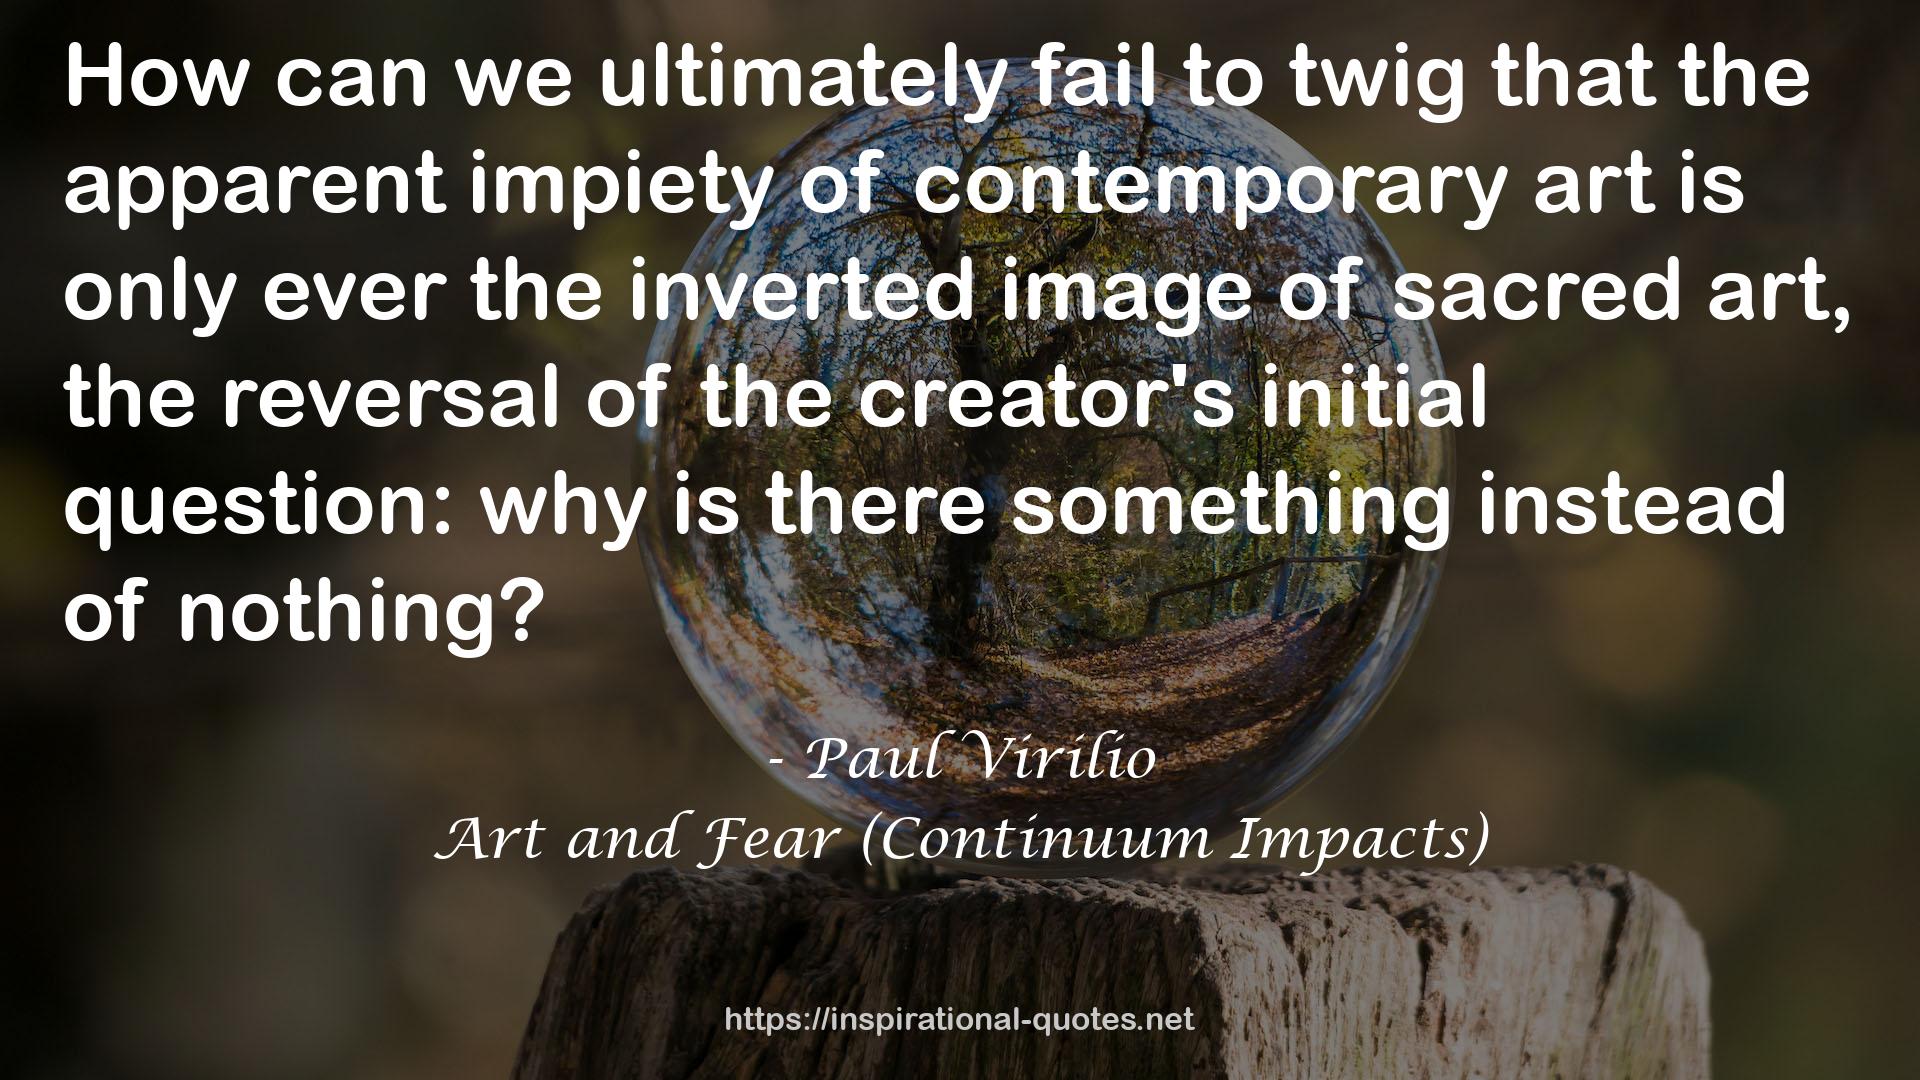 Art and Fear (Continuum Impacts) QUOTES